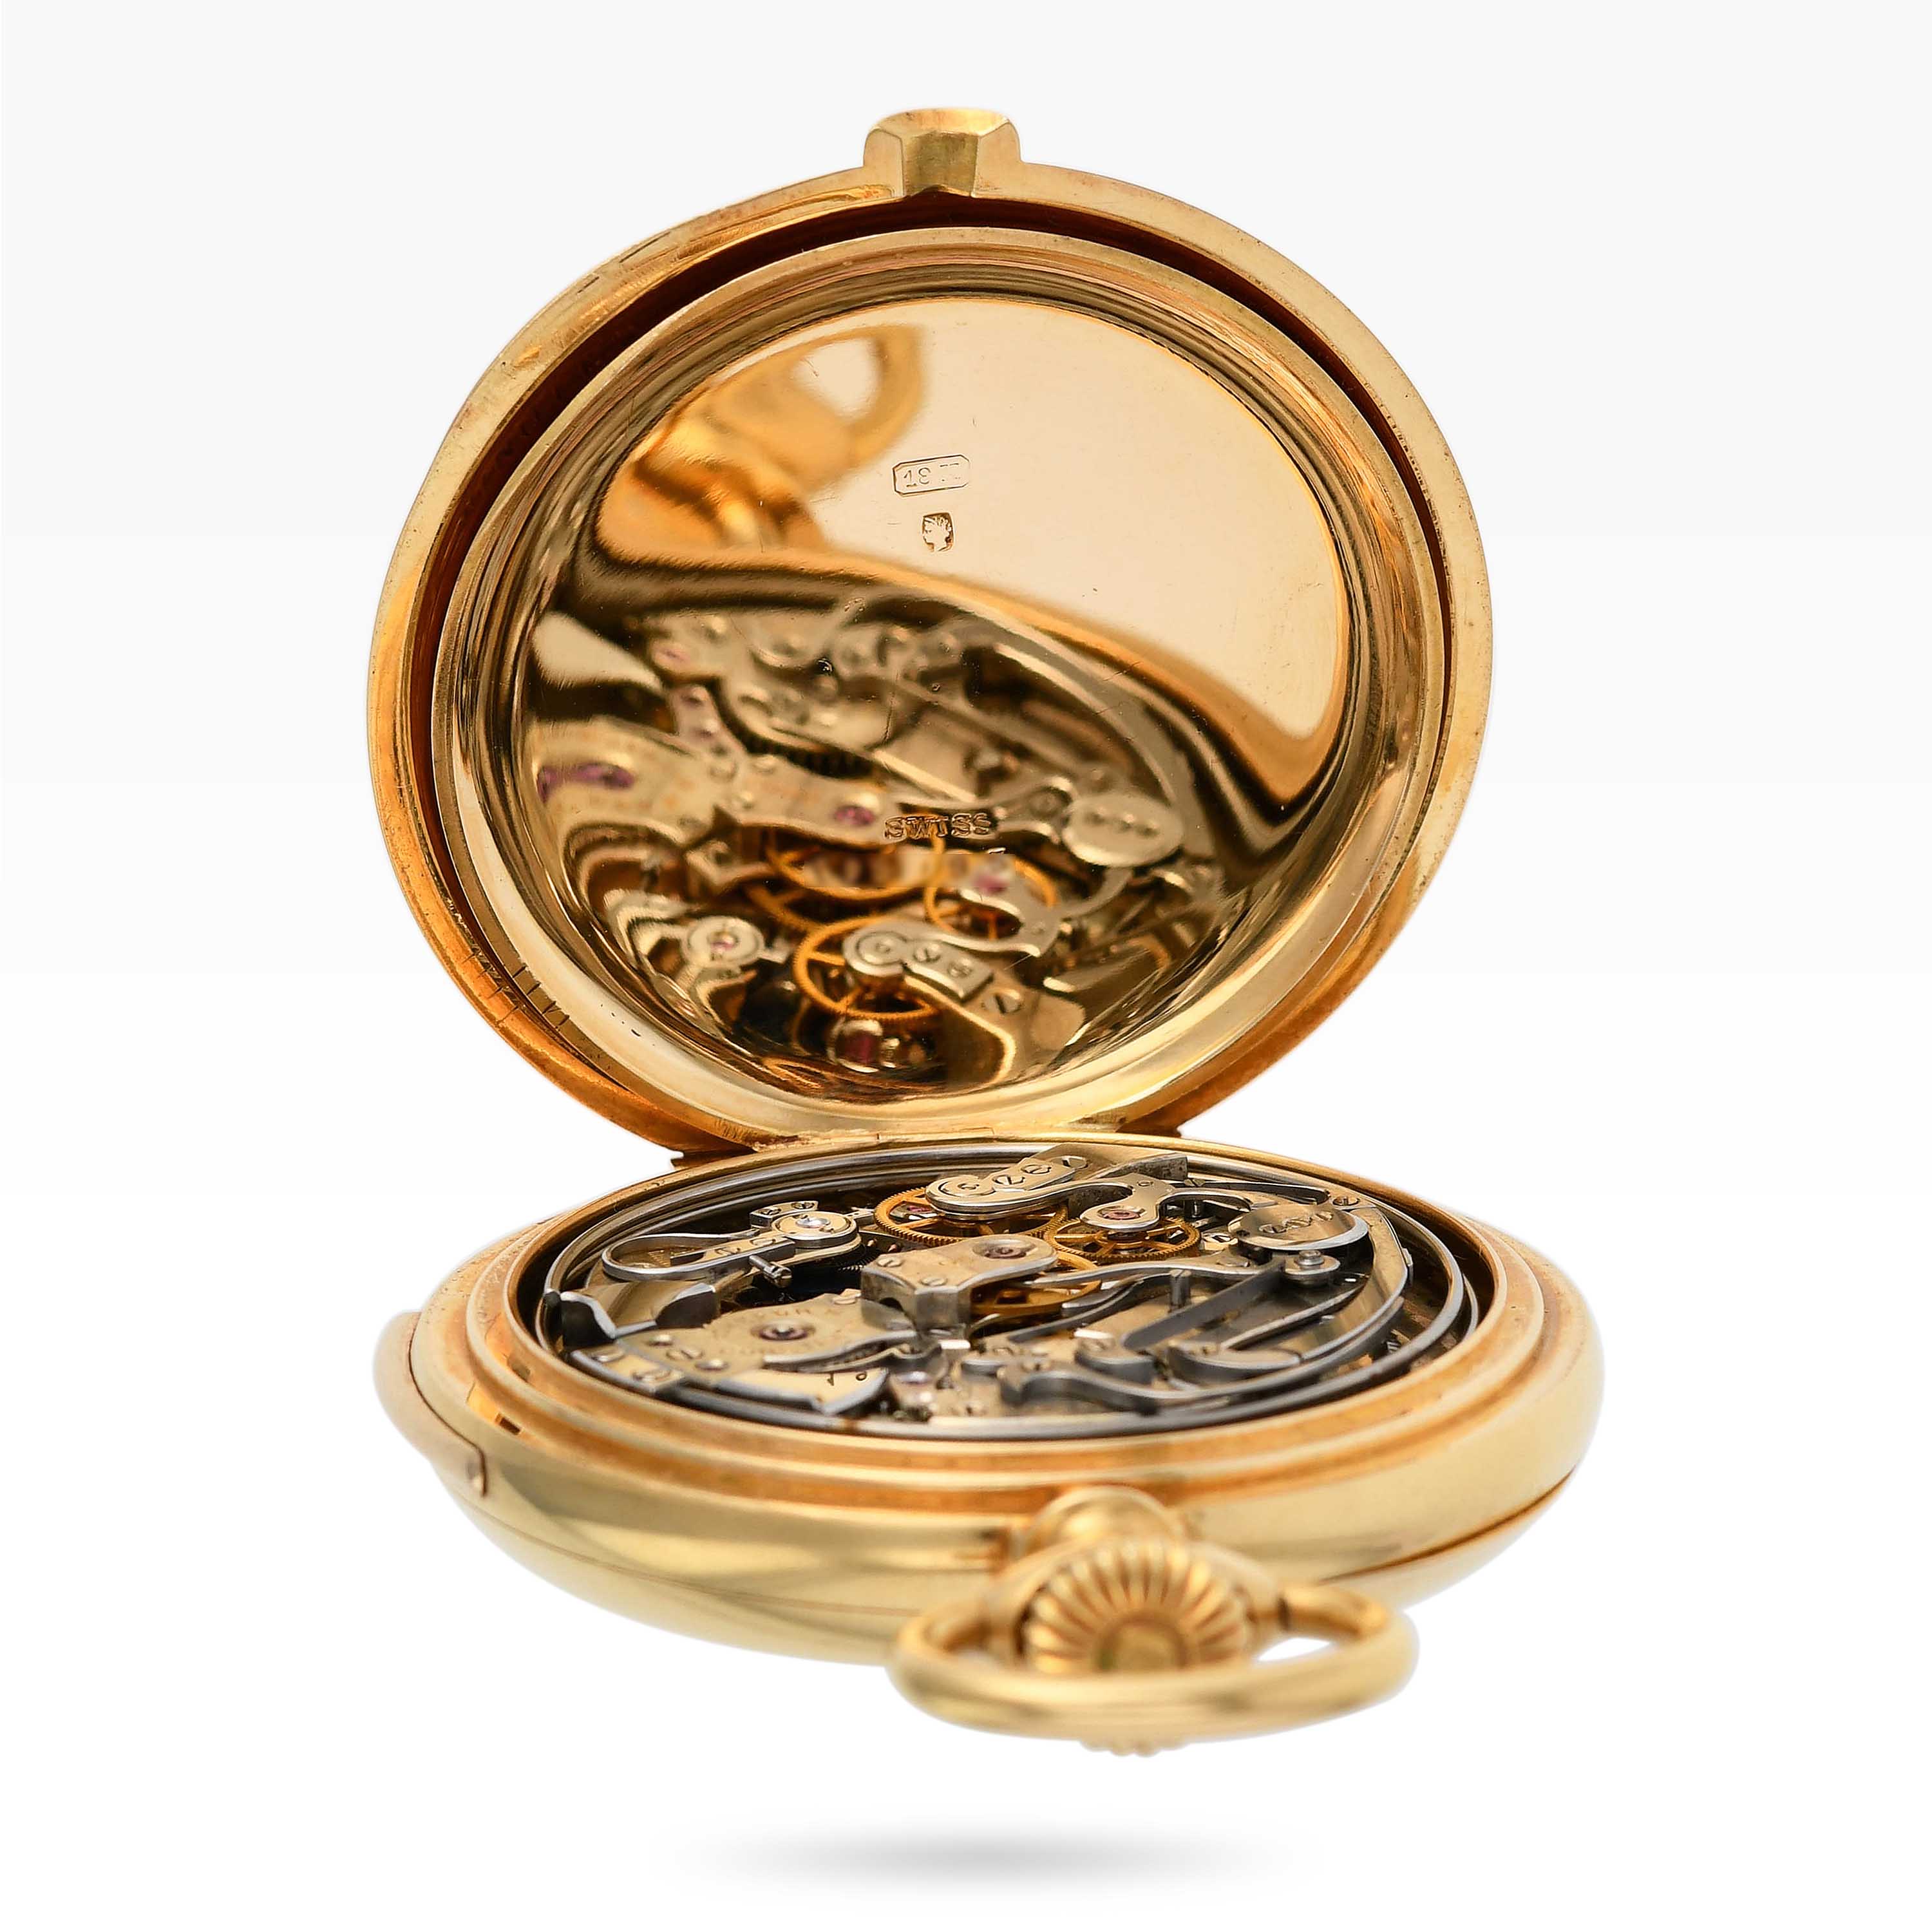 1324VC1 Vacheron 30 Minute-counter, Minute Repeater, pocket watch yellow gold img-main5